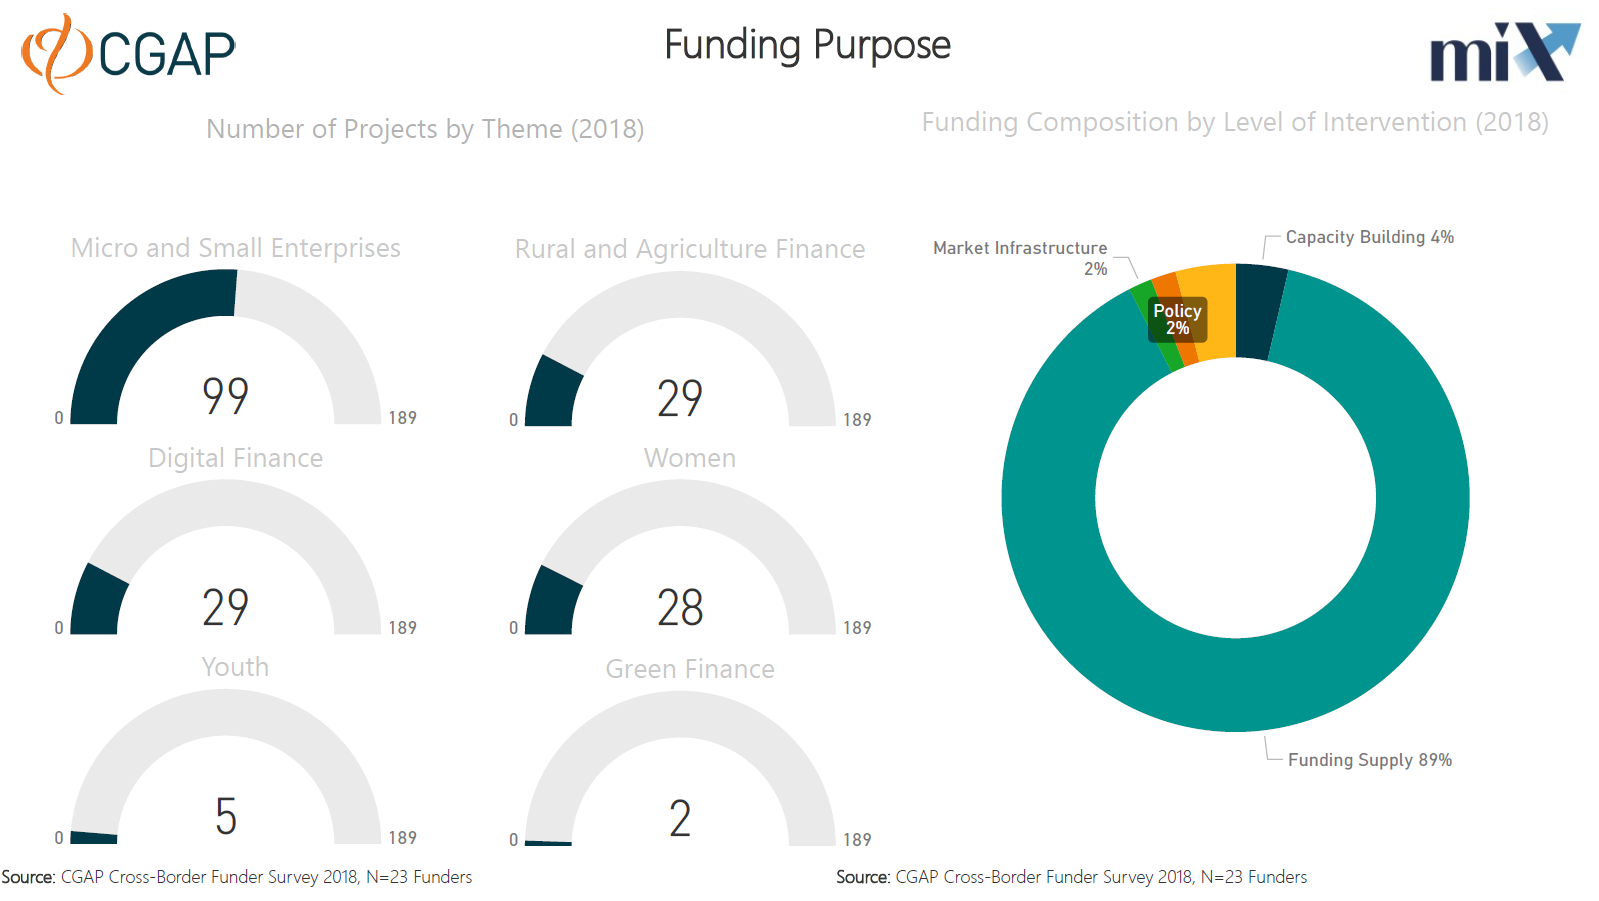 What do funders fund in South Asia? (Themes, funding purpose)